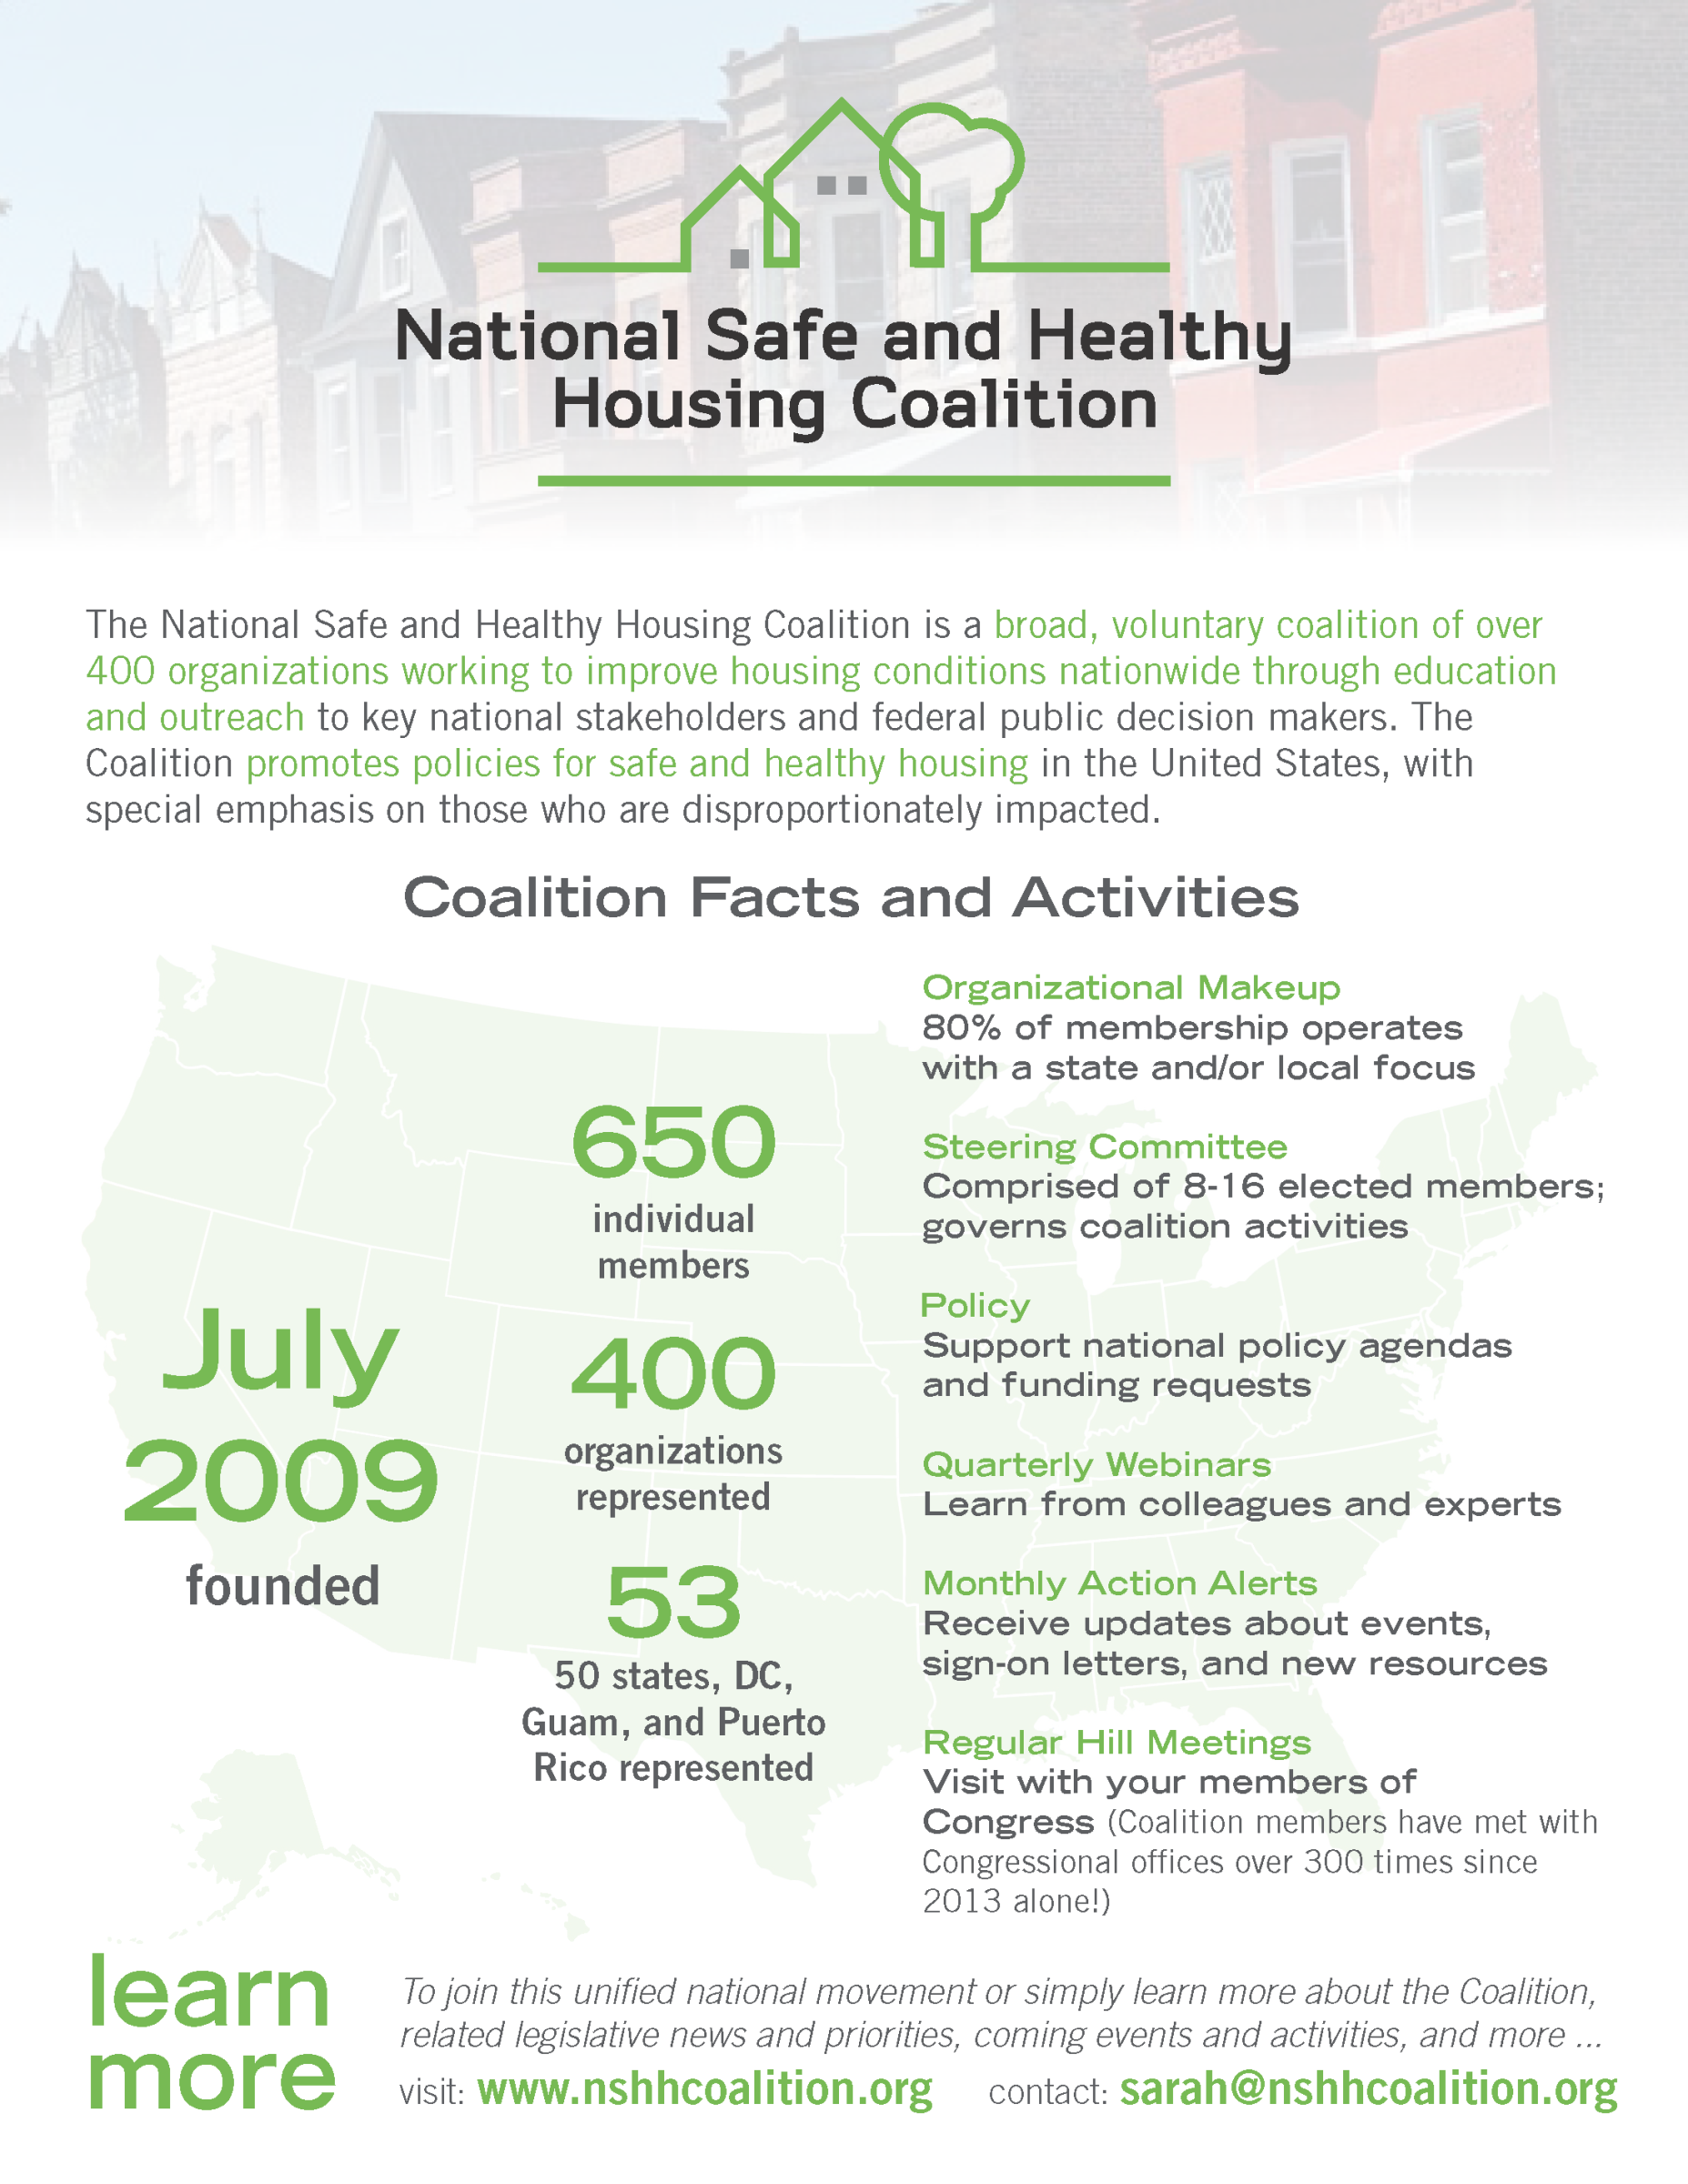 NSHHC Facts and Figures